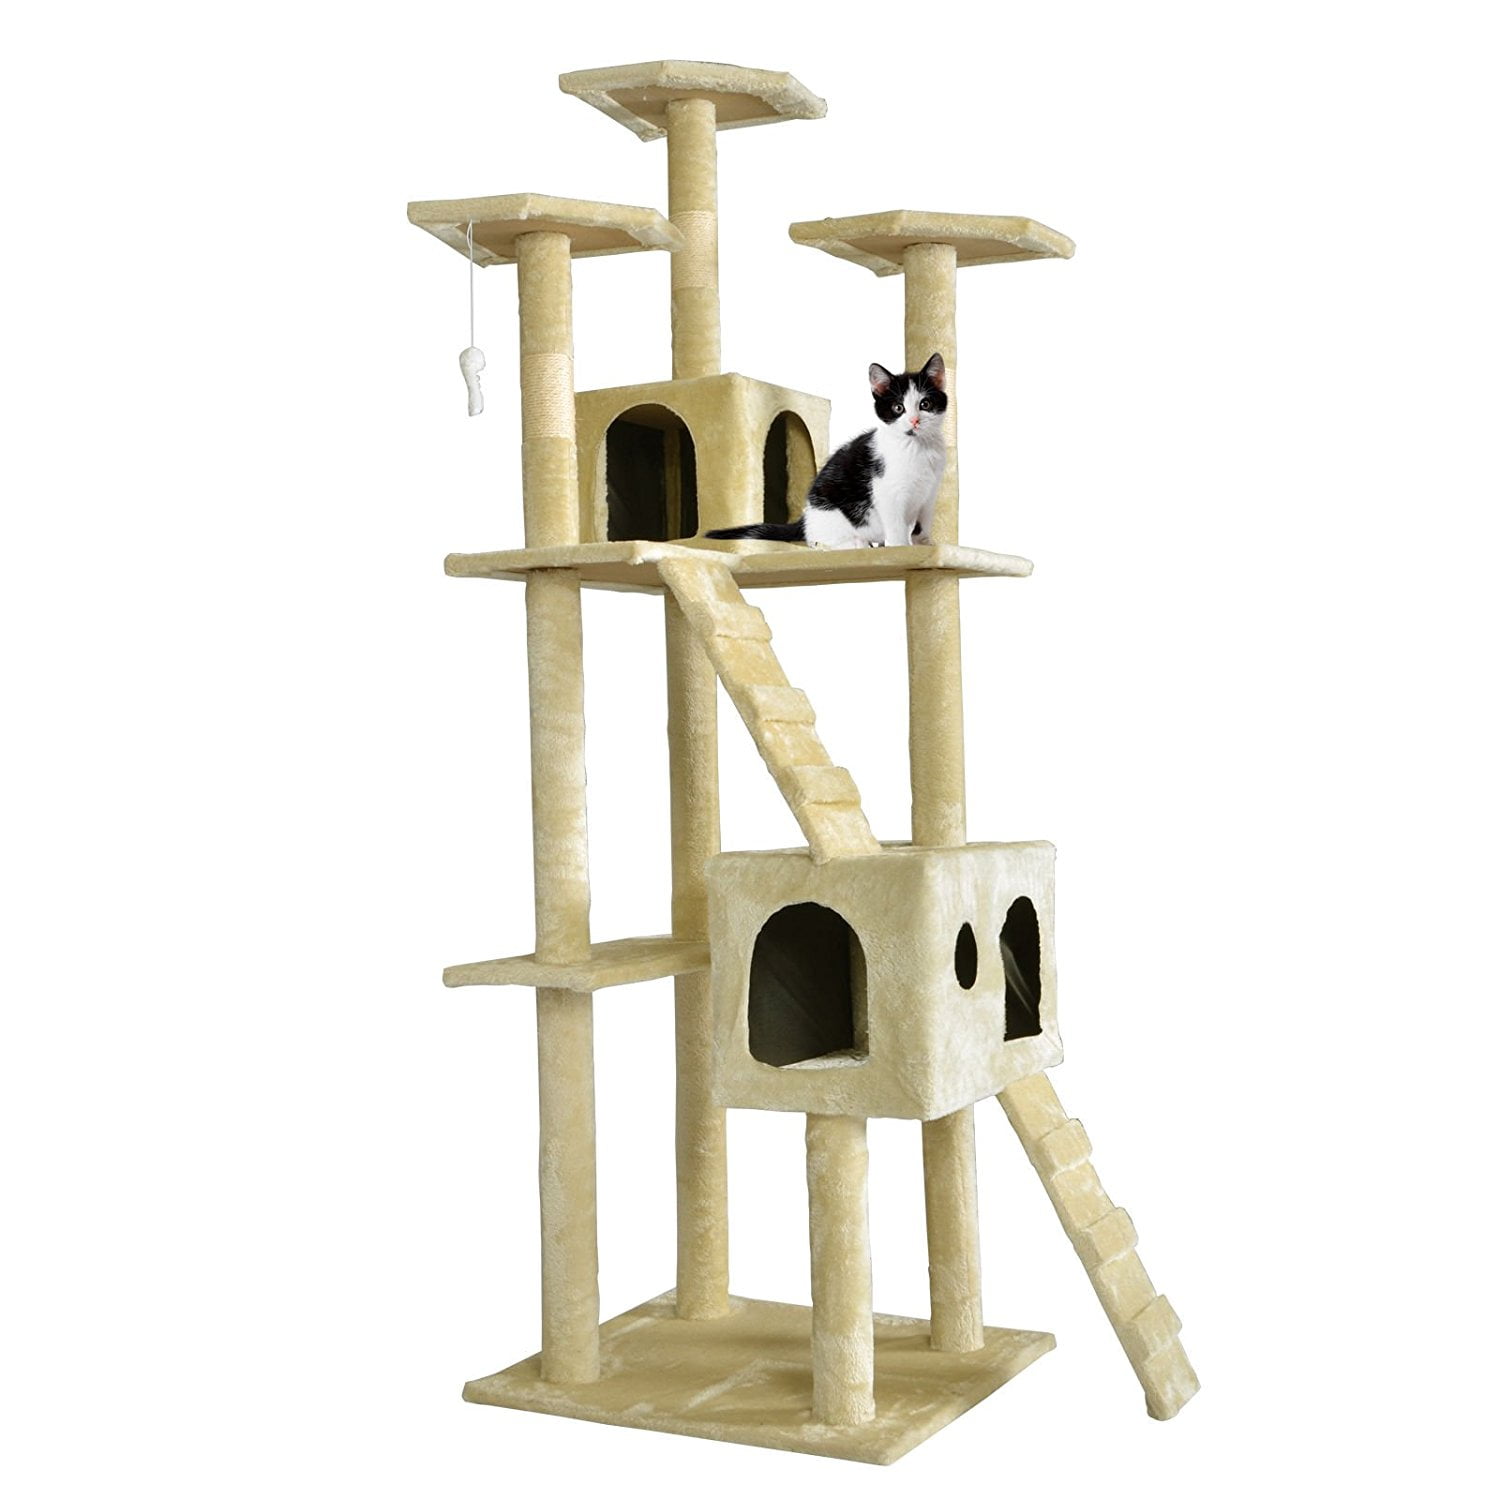 73“ Cat Tree Scratcher Play House Cat Condo Furniture Bed Post Pet House 